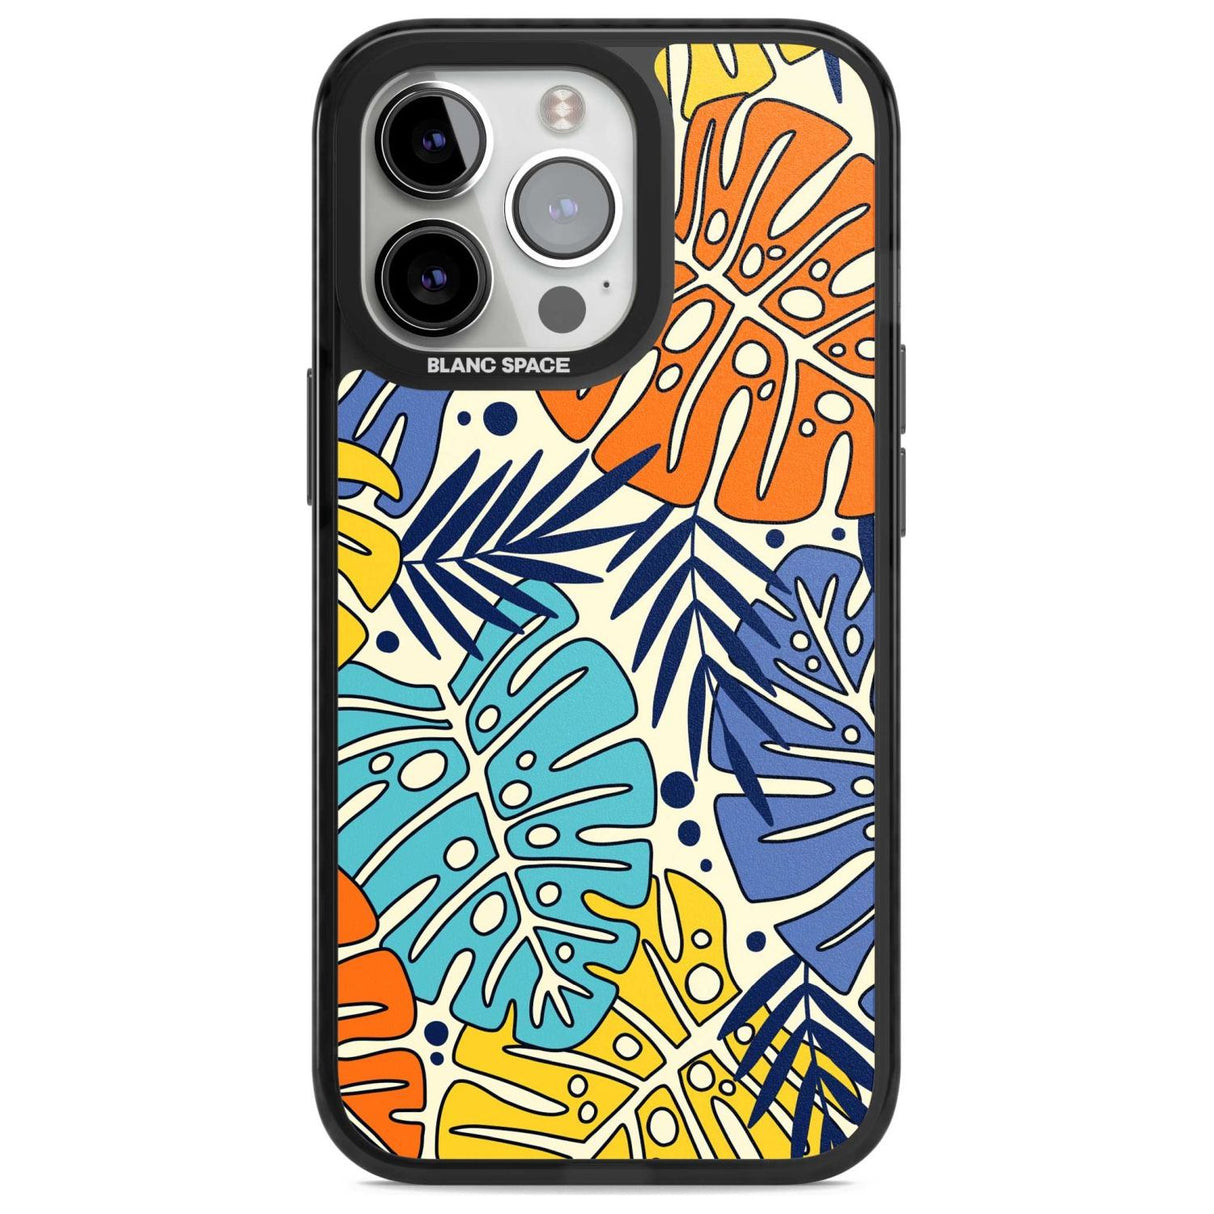 Beach Leaves Phone Case iPhone 15 Pro Max / Magsafe Black Impact Case,iPhone 15 Pro / Magsafe Black Impact Case,iPhone 14 Pro Max / Magsafe Black Impact Case,iPhone 14 Pro / Magsafe Black Impact Case,iPhone 13 Pro / Magsafe Black Impact Case Blanc Space